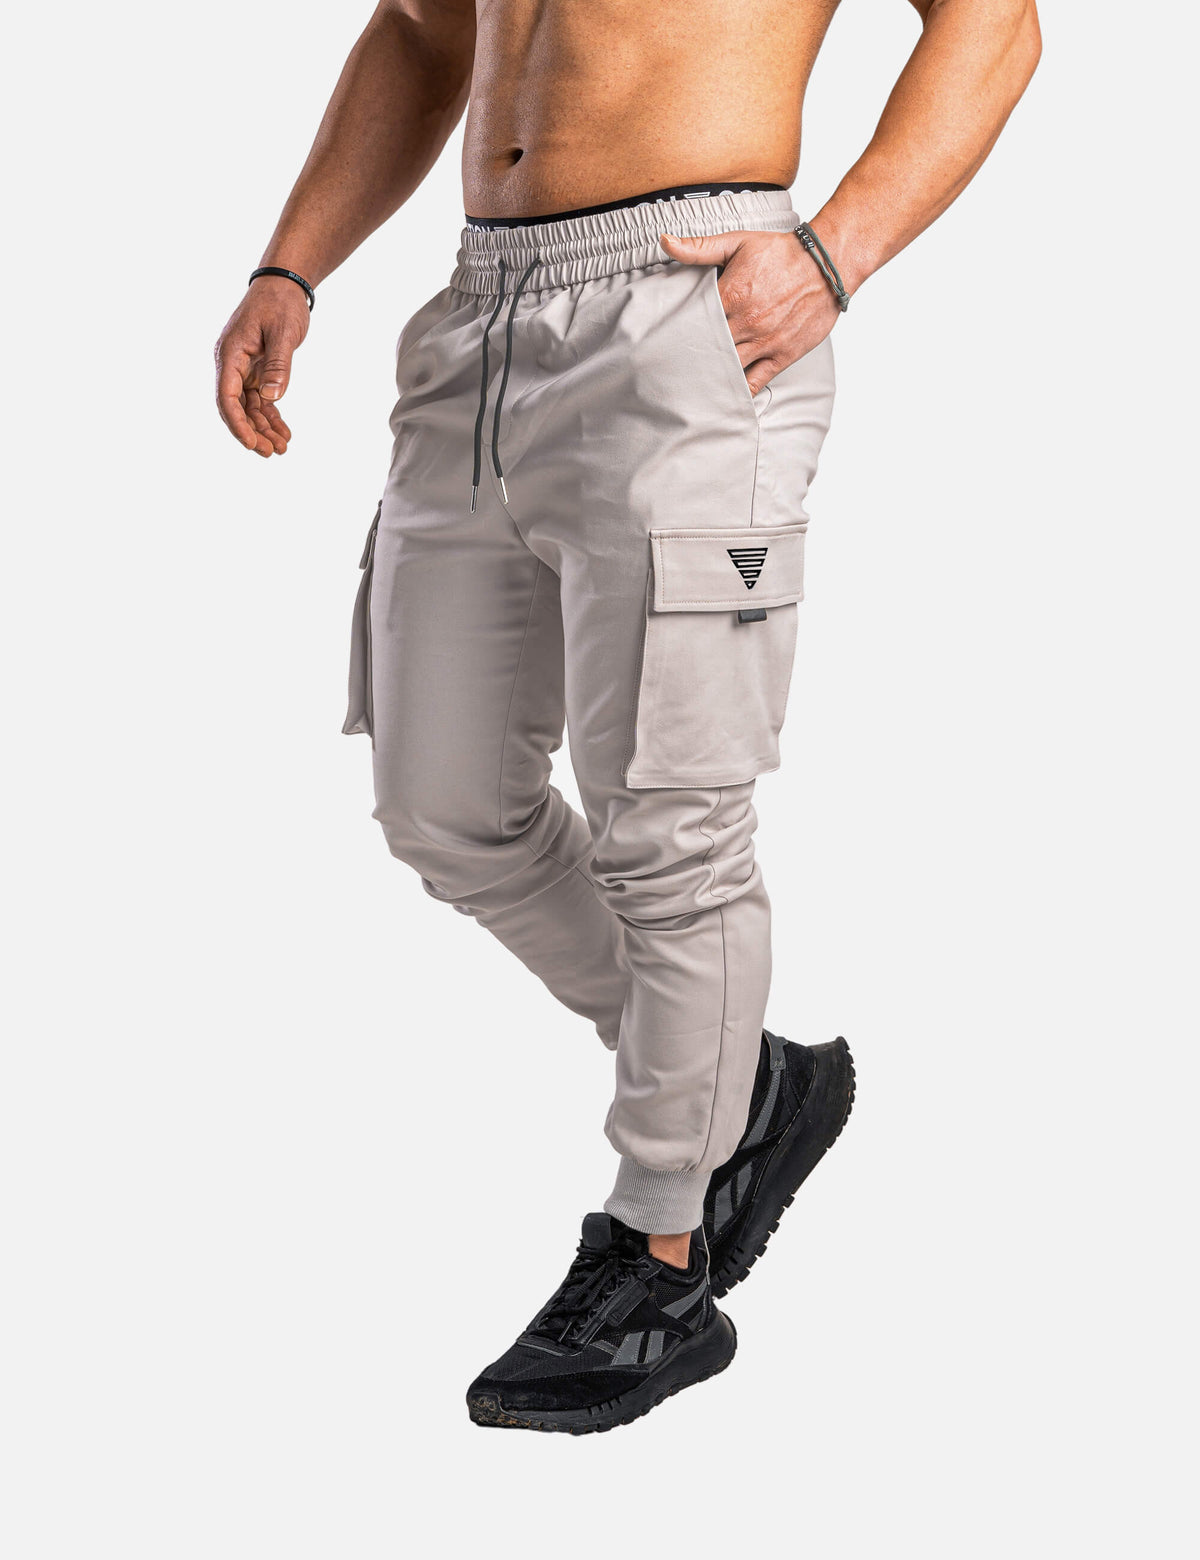 Sweatpants for your Calisthenics & Street-Workout